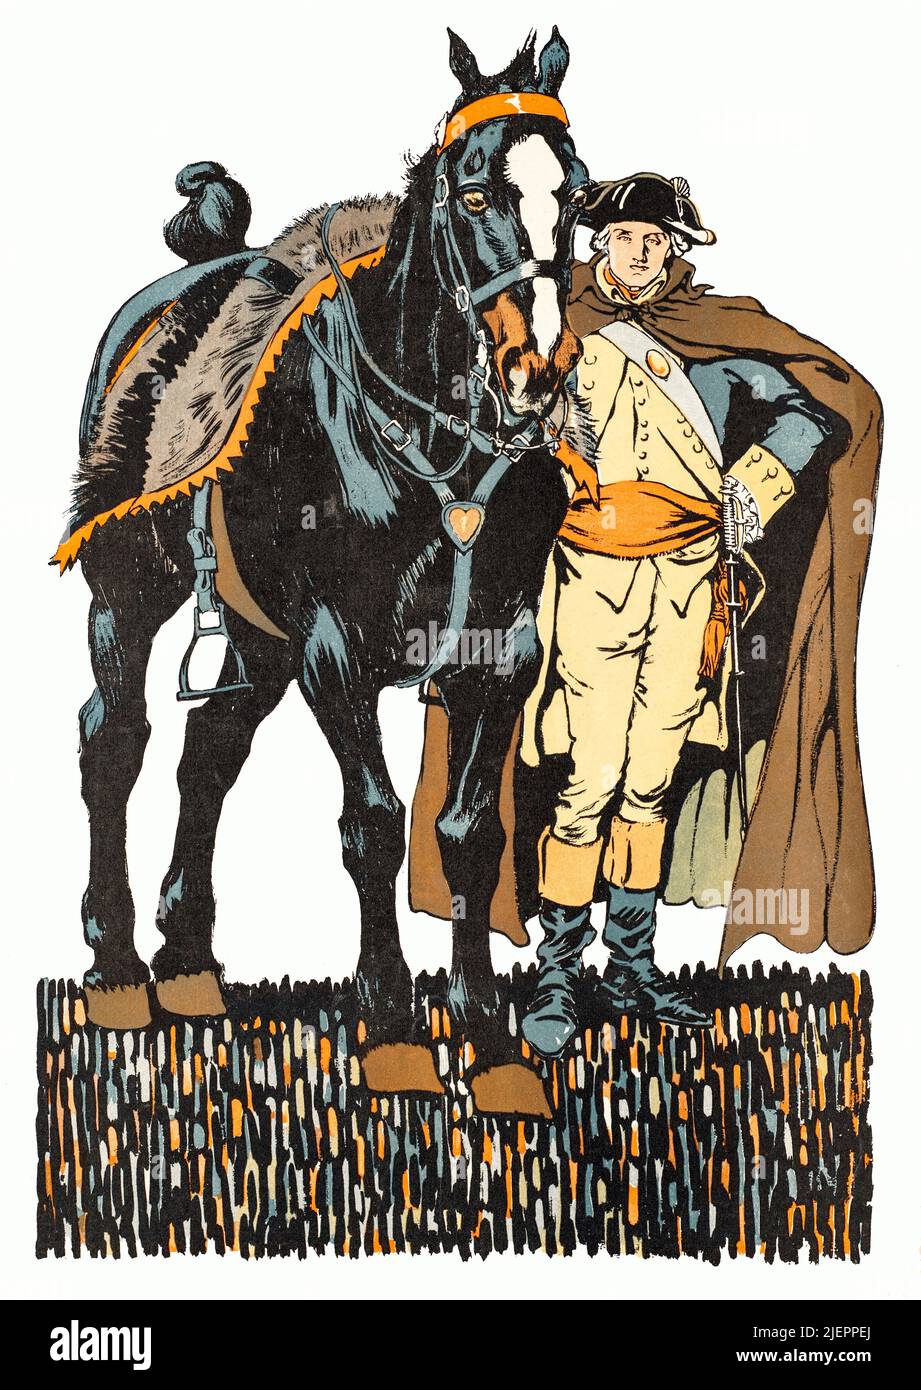 An early 20th century illustration by Edward Penfield (1866-1925) on the cover of Collier's, an American general interest magazine featuring George Washington (1732-1799) standing next to his horse.  Military officer, statesman, and Founding Father he served as the 1st president of the United States from 1789 to 1797 Stock Photo